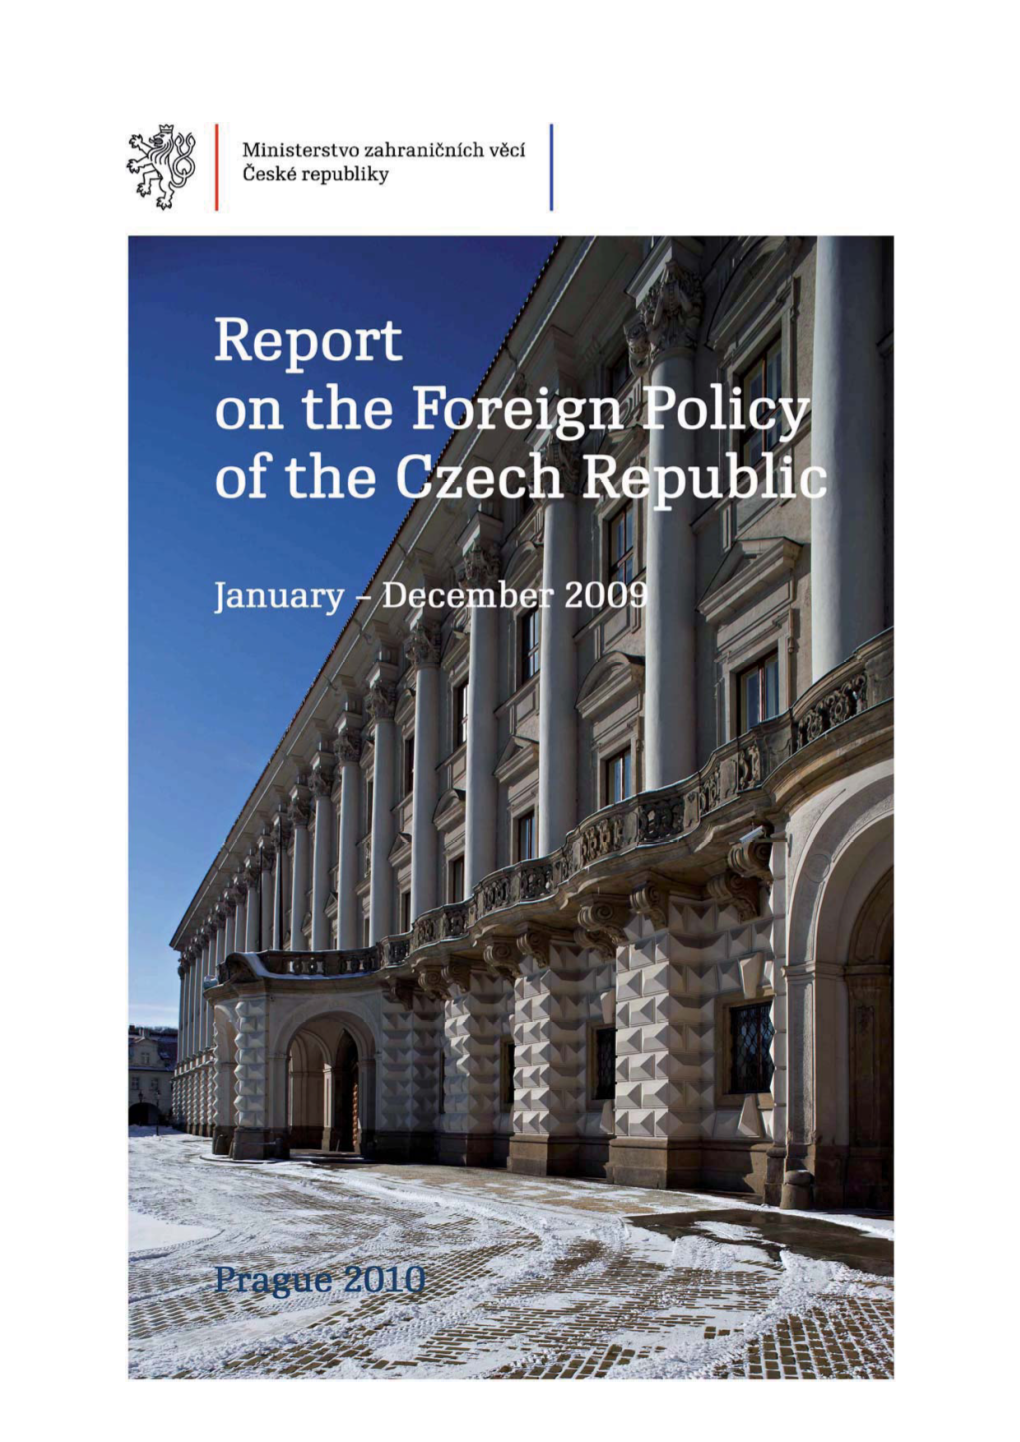 Report on the Foreign Policy 2009